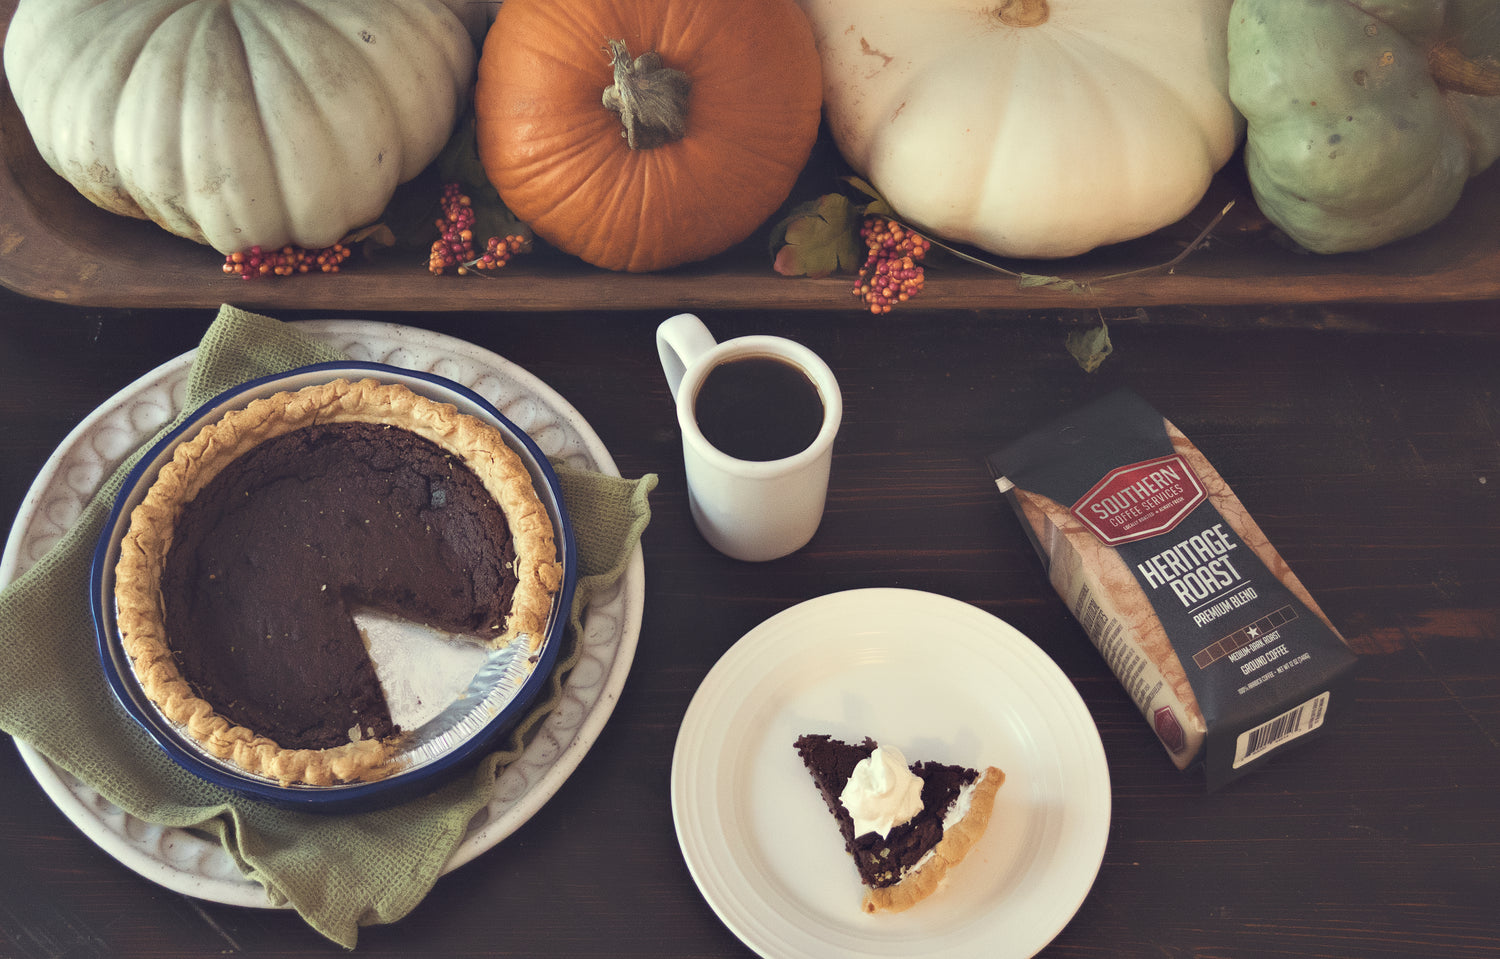 Minny's Chocolate Pie from The Help, thanksgiving, pumpkins